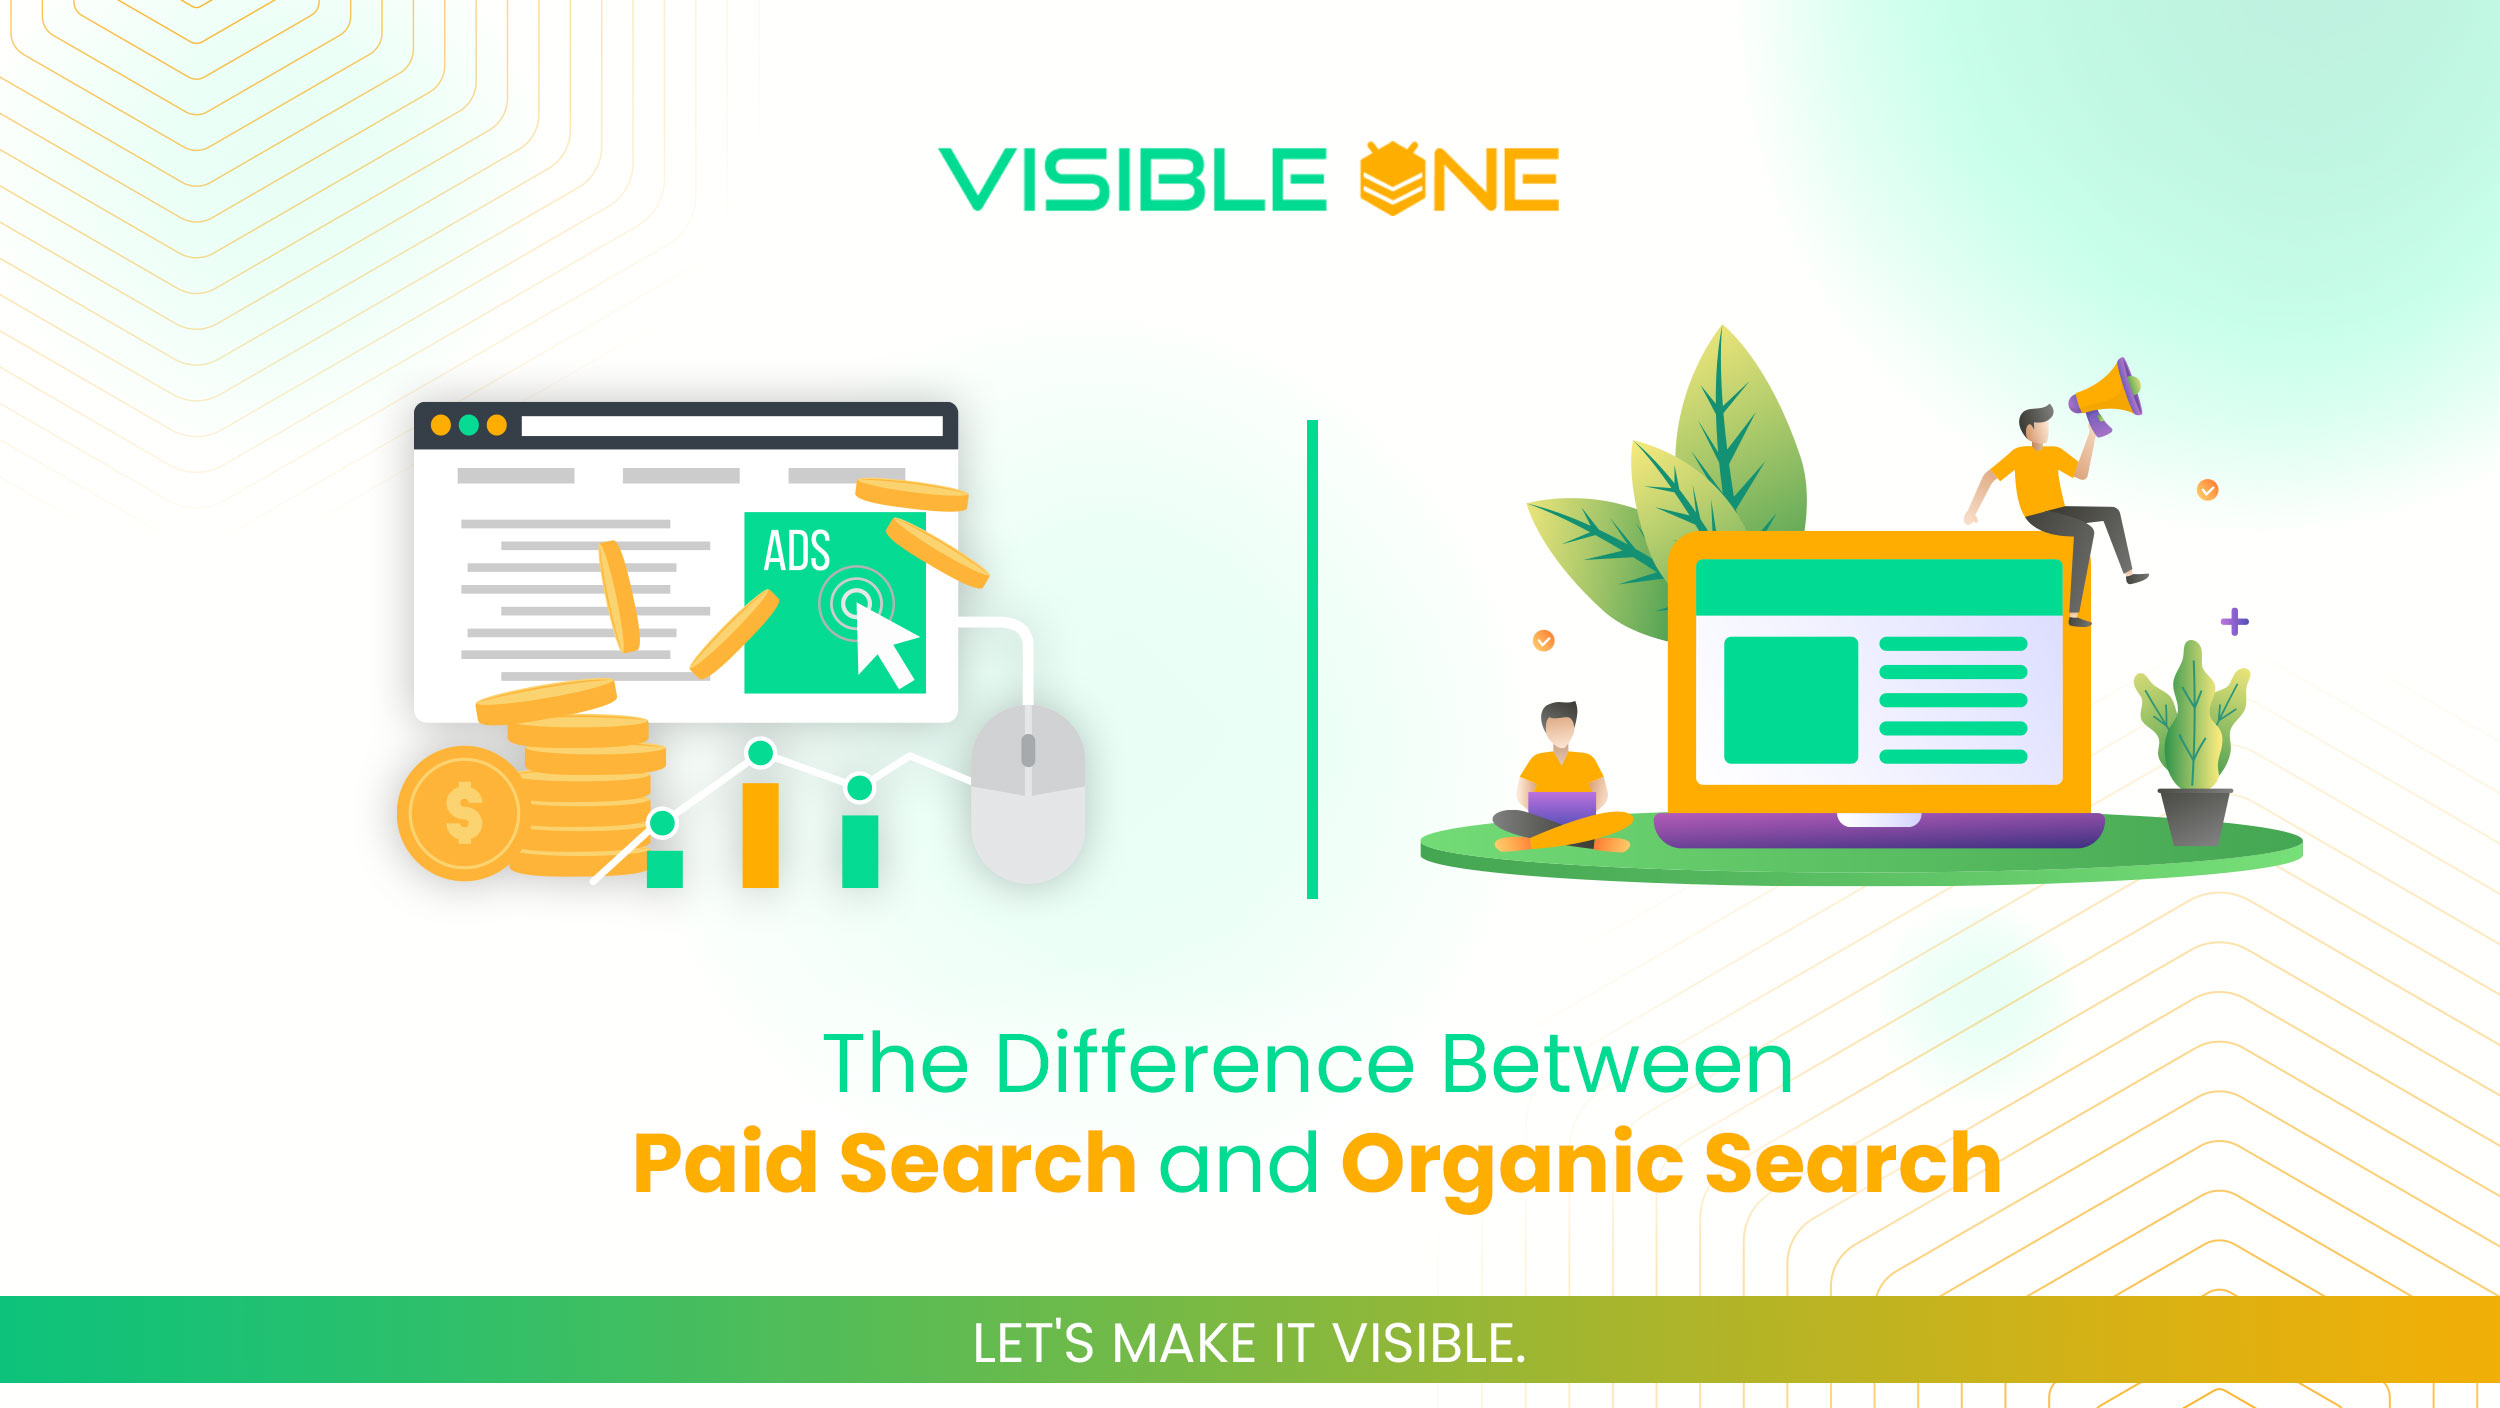 The Difference Between Paid Search and Organic Search